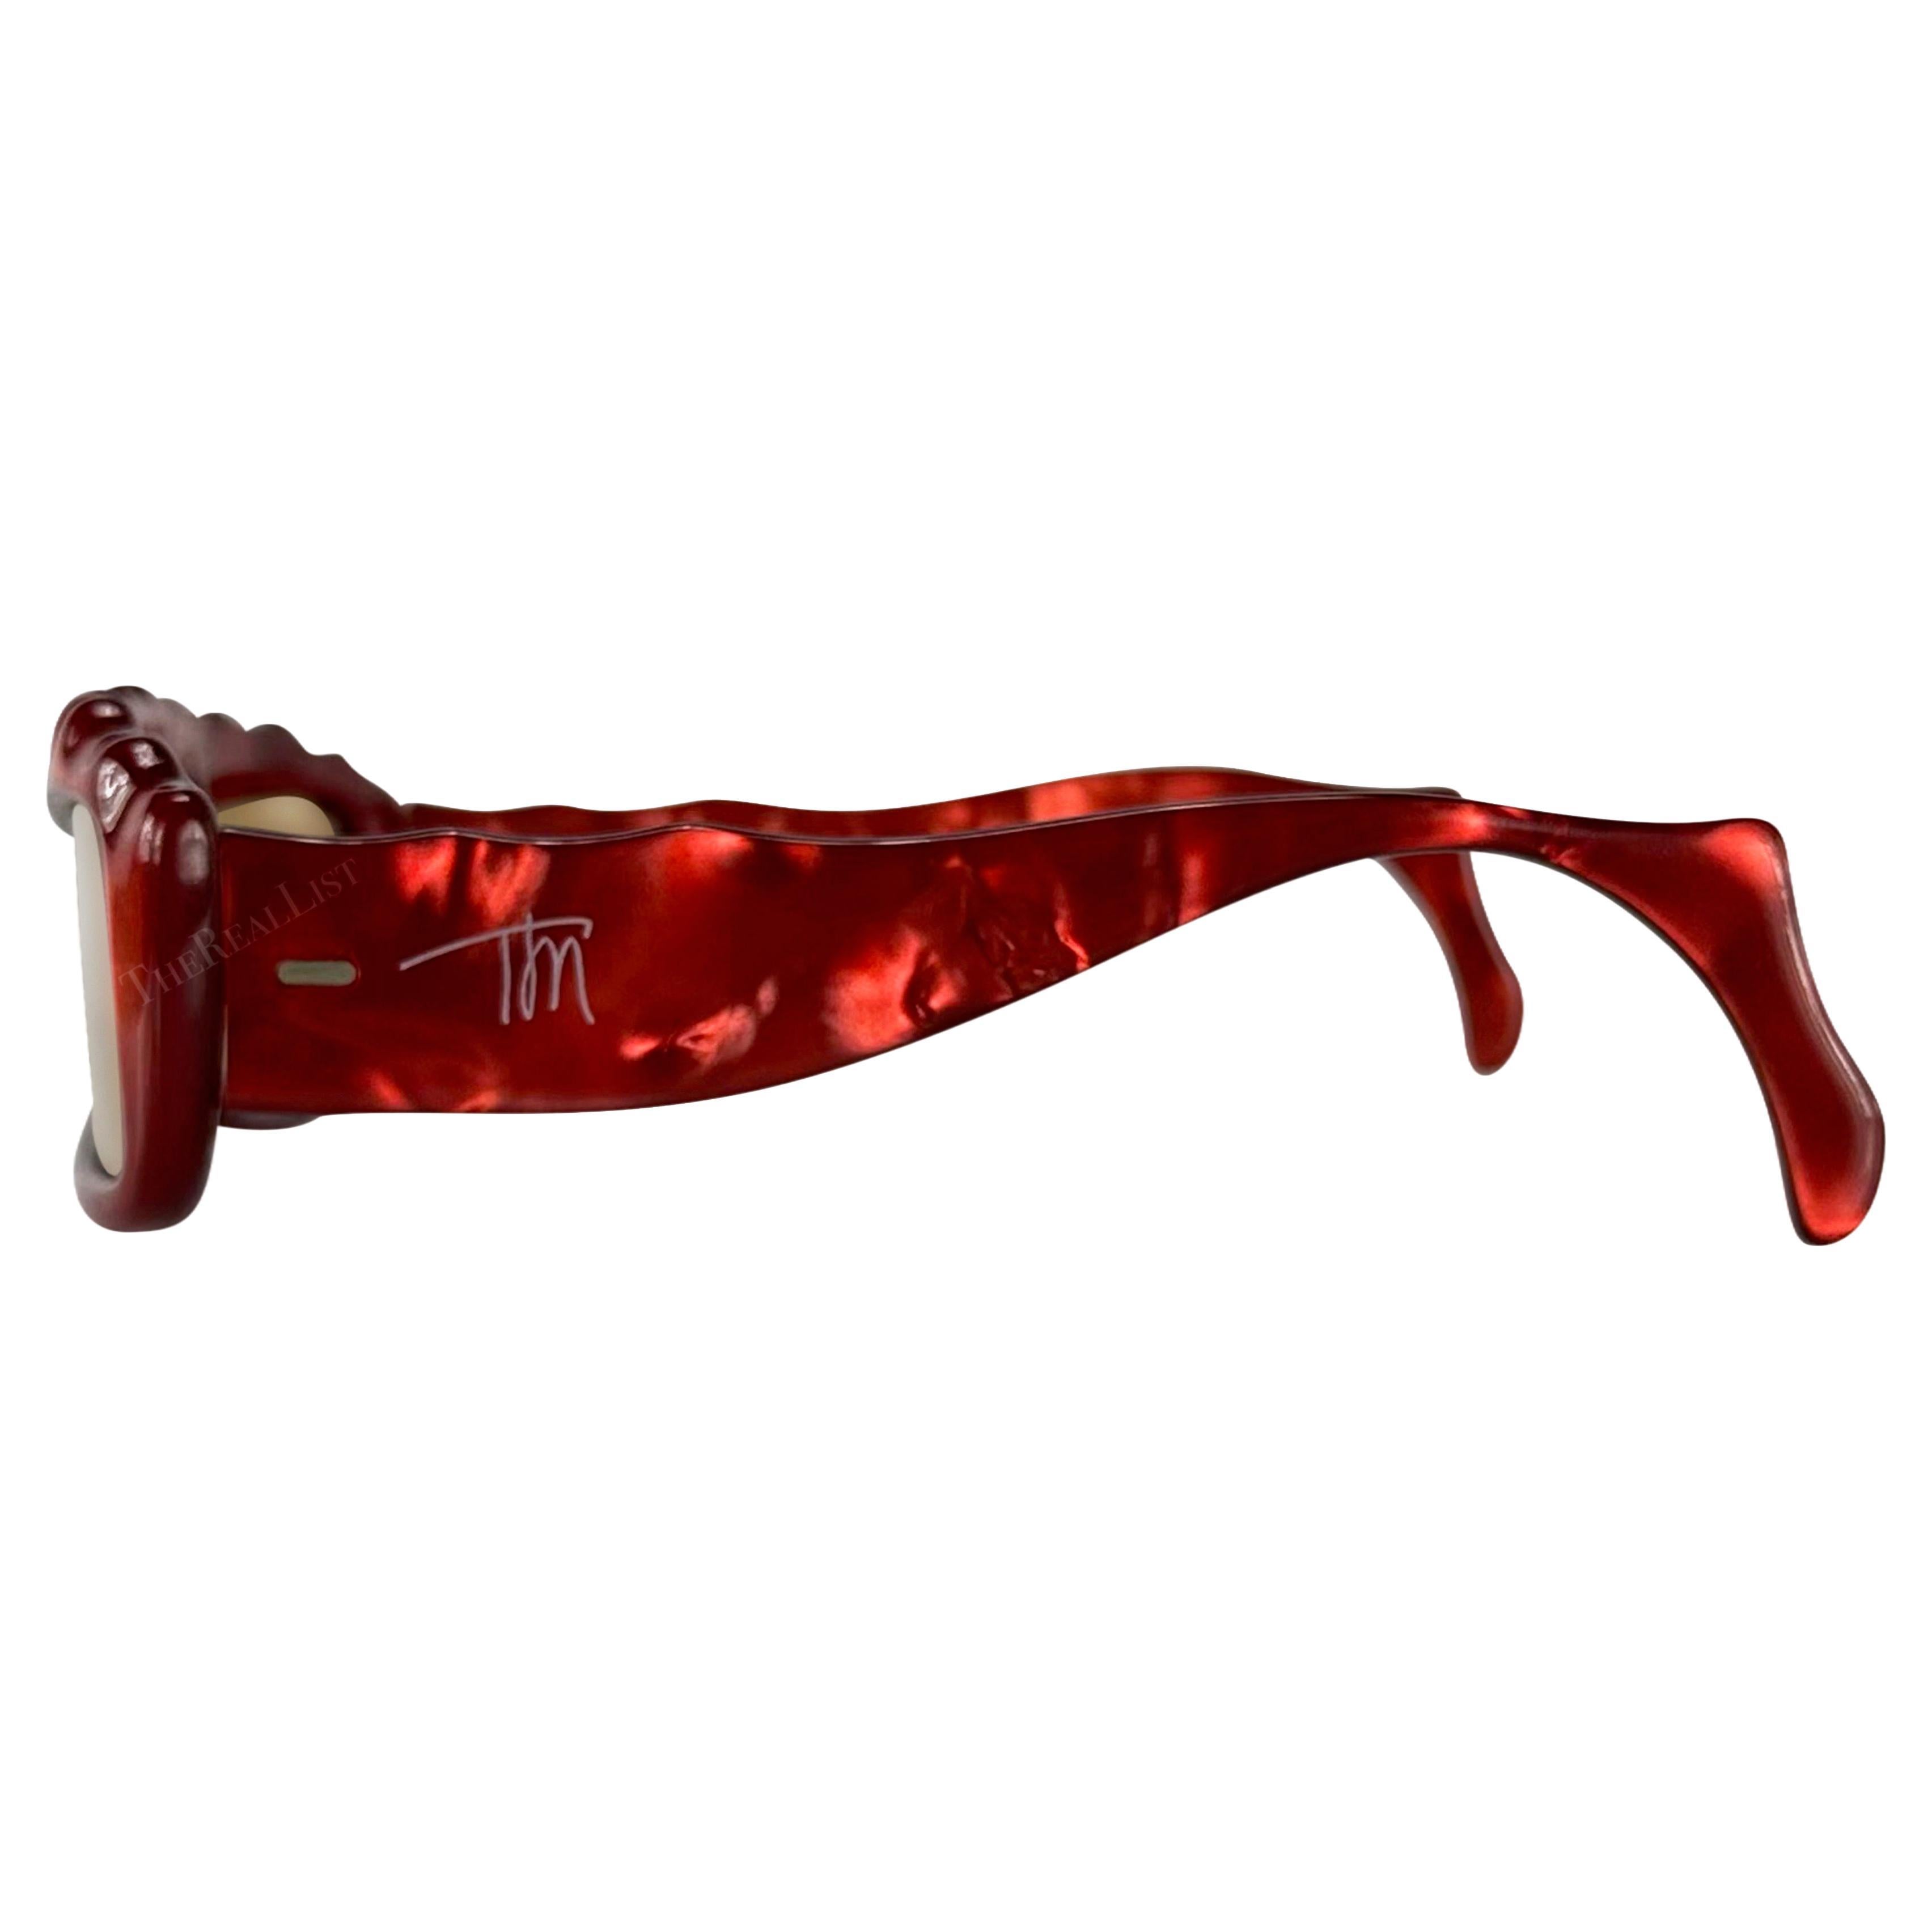 S/S 1979 Thierry Mugler Red Opalescent Red Sculpted Rectangular Sunglasses For Sale 4